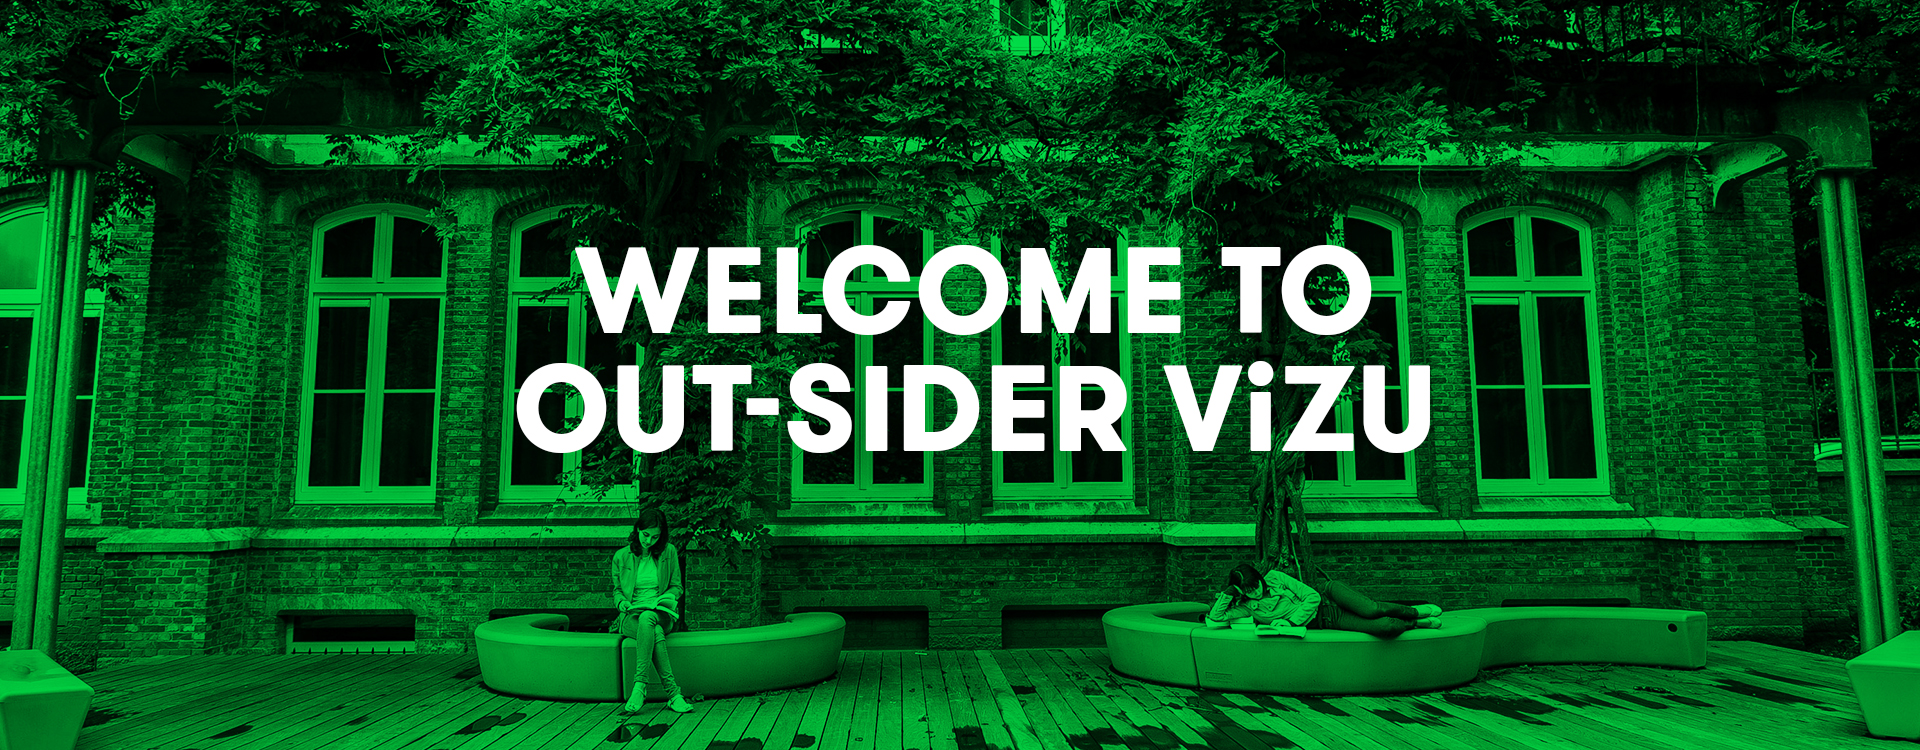 New Visualisation Tool from Out-sider - VIZU